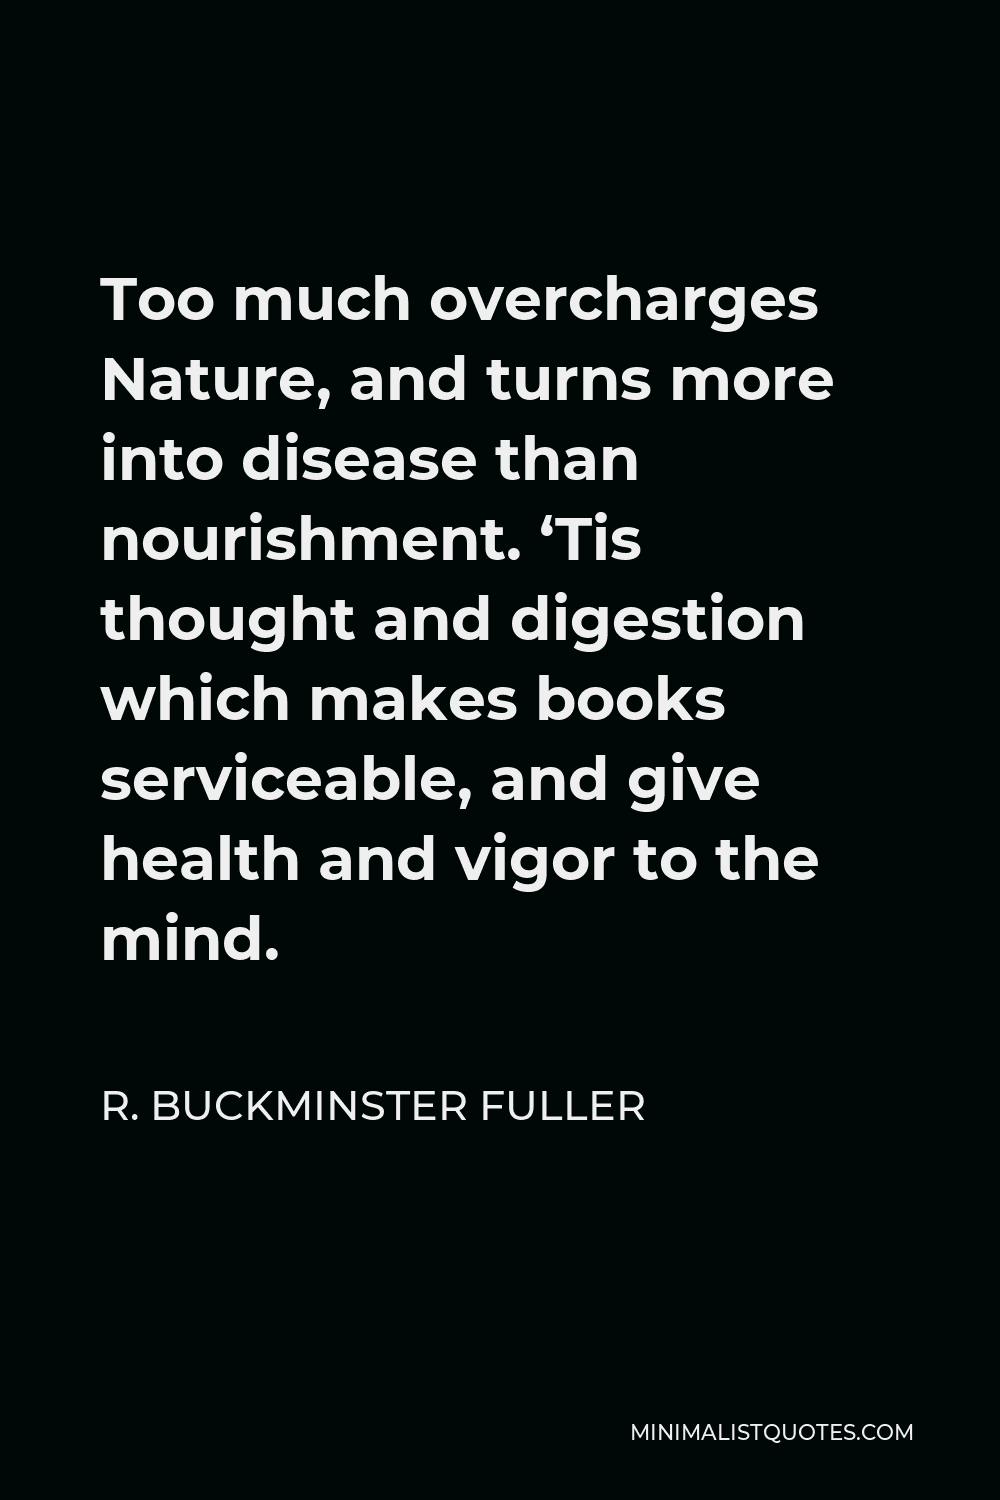 R. Buckminster Fuller Quote - Too much overcharges Nature, and turns more into disease than nourishment. ‘Tis thought and digestion which makes books serviceable, and give health and vigor to the mind.